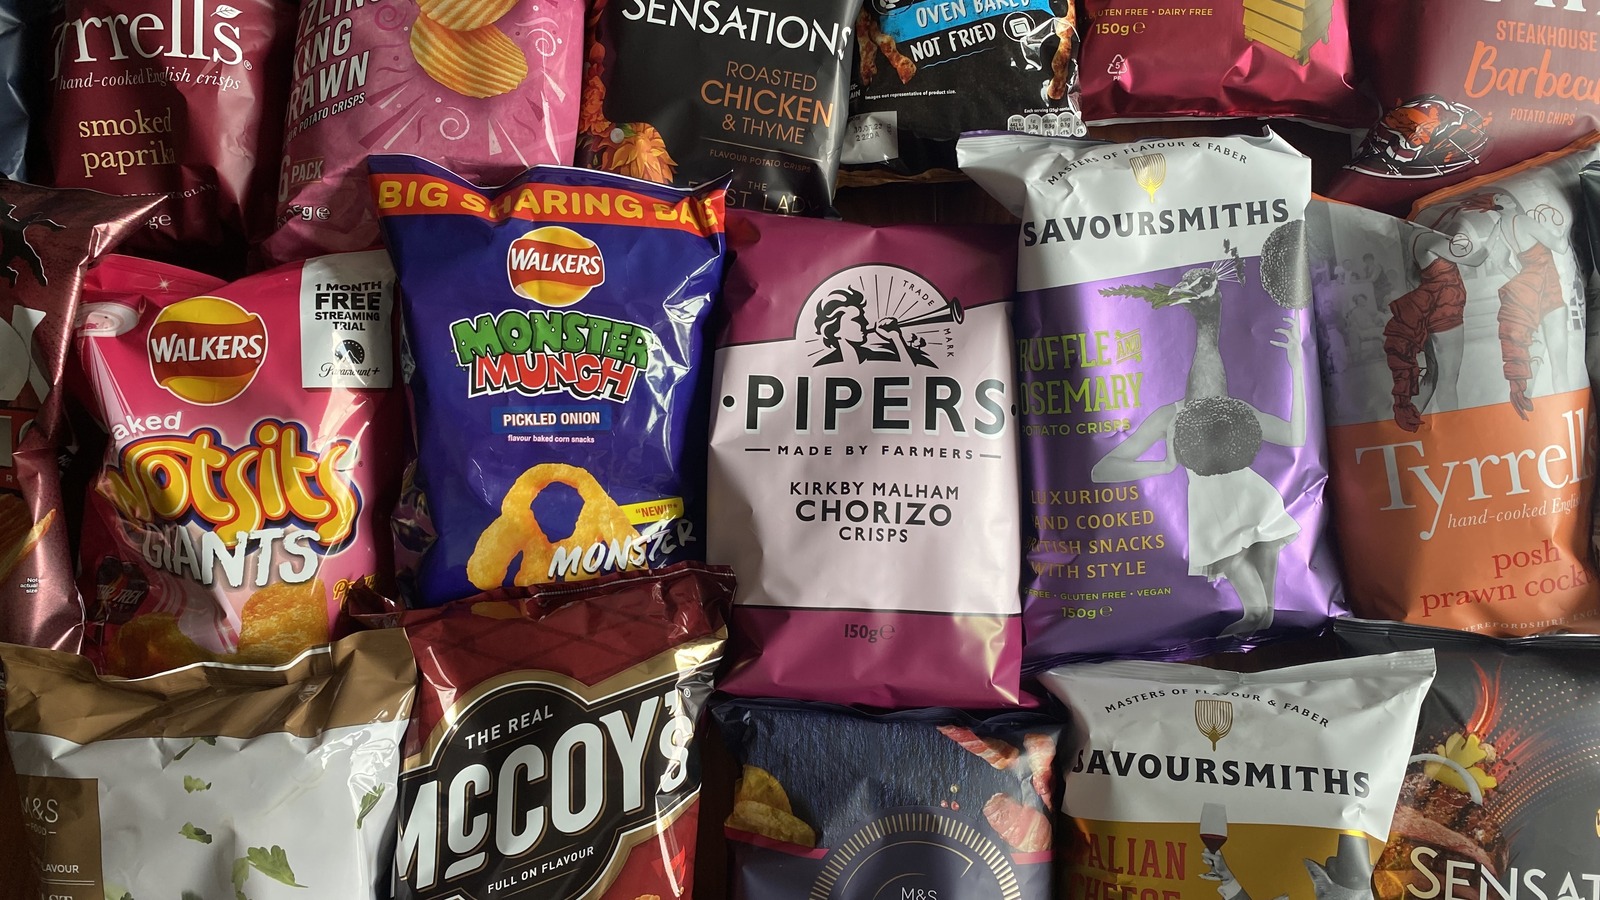 https://www.tastingtable.com/img/gallery/20-british-potato-chip-flavors-ranked-from-worst-to-best/l-intro-1667583281.jpg